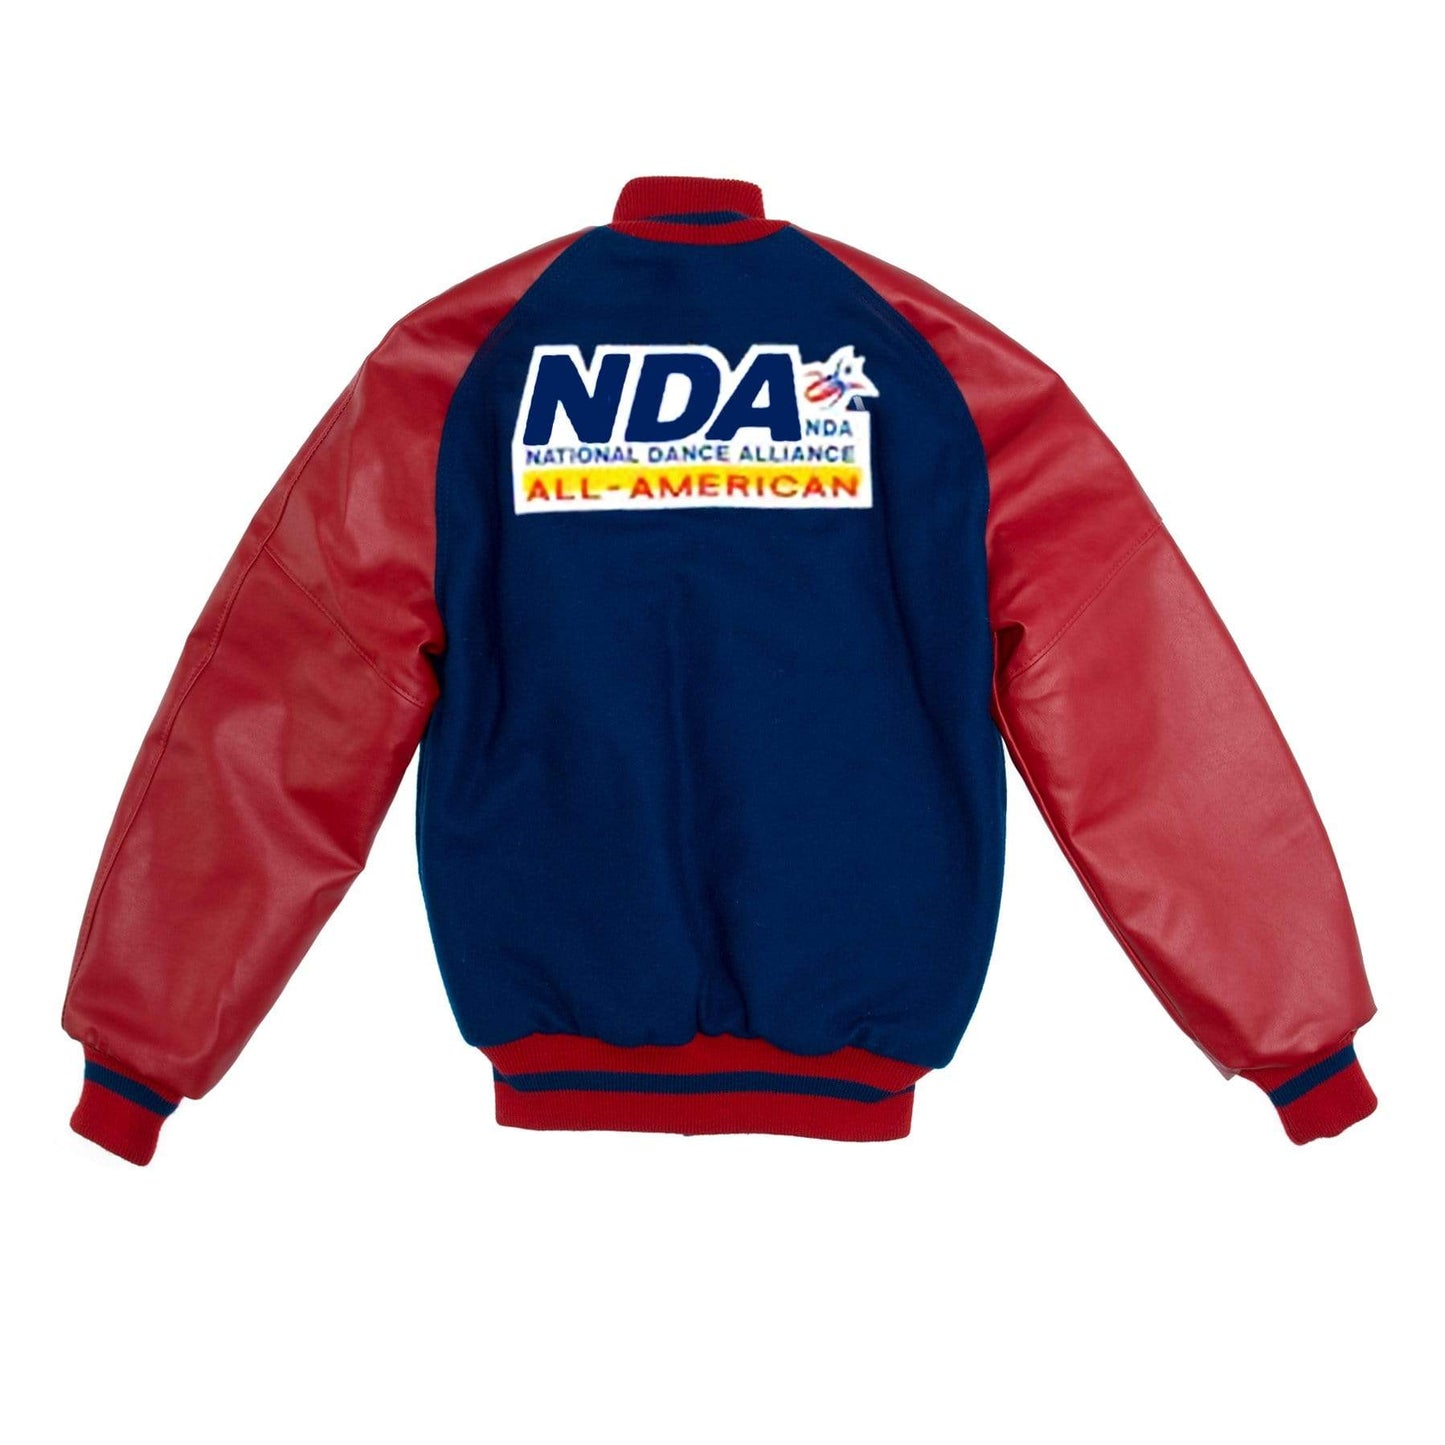 Load image into Gallery viewer, NDA All-American Jacket
